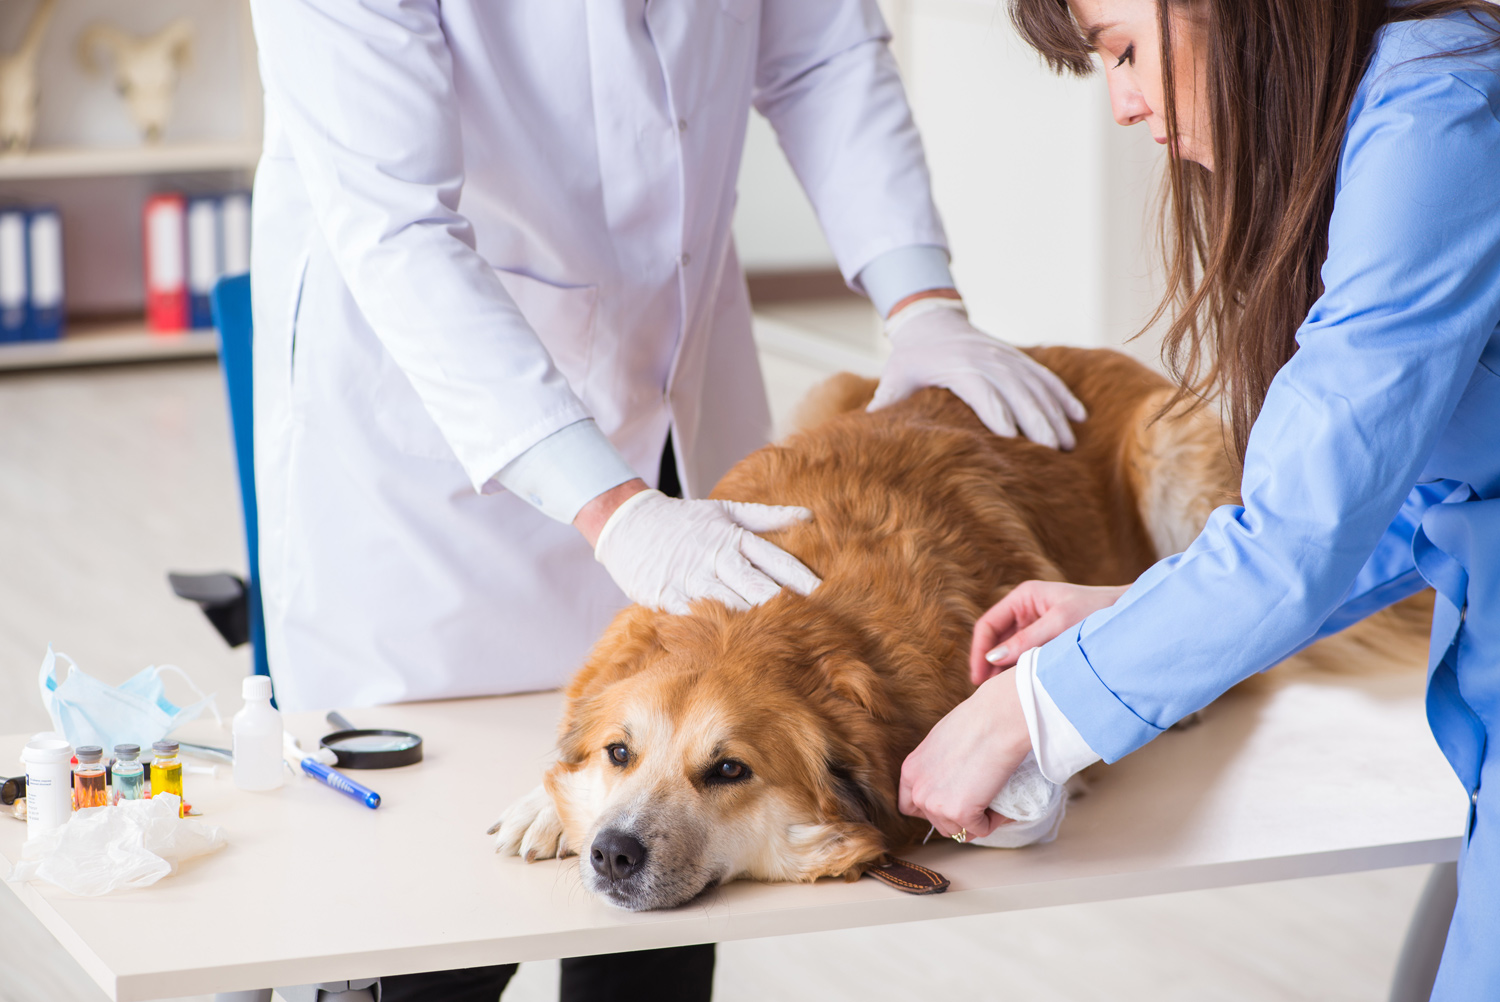 Empowering Veterinary Care through Ultrasound Vision, Scan For Emergency Patients